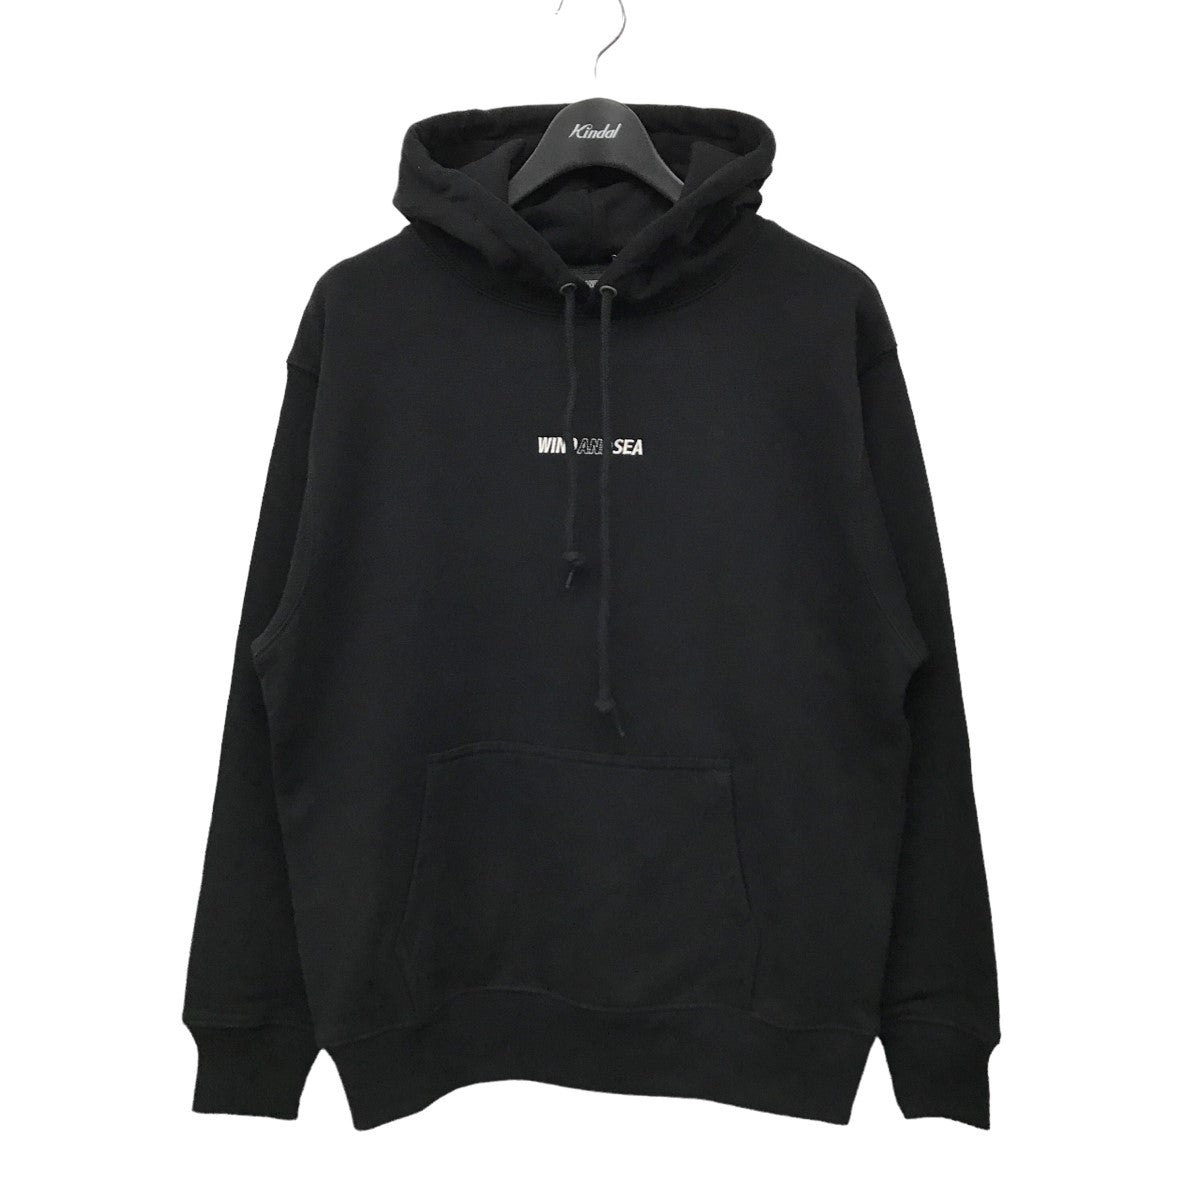 WIND AND SEA PRINT HOODIE PARKA L ゼブラ 別注 - トップス